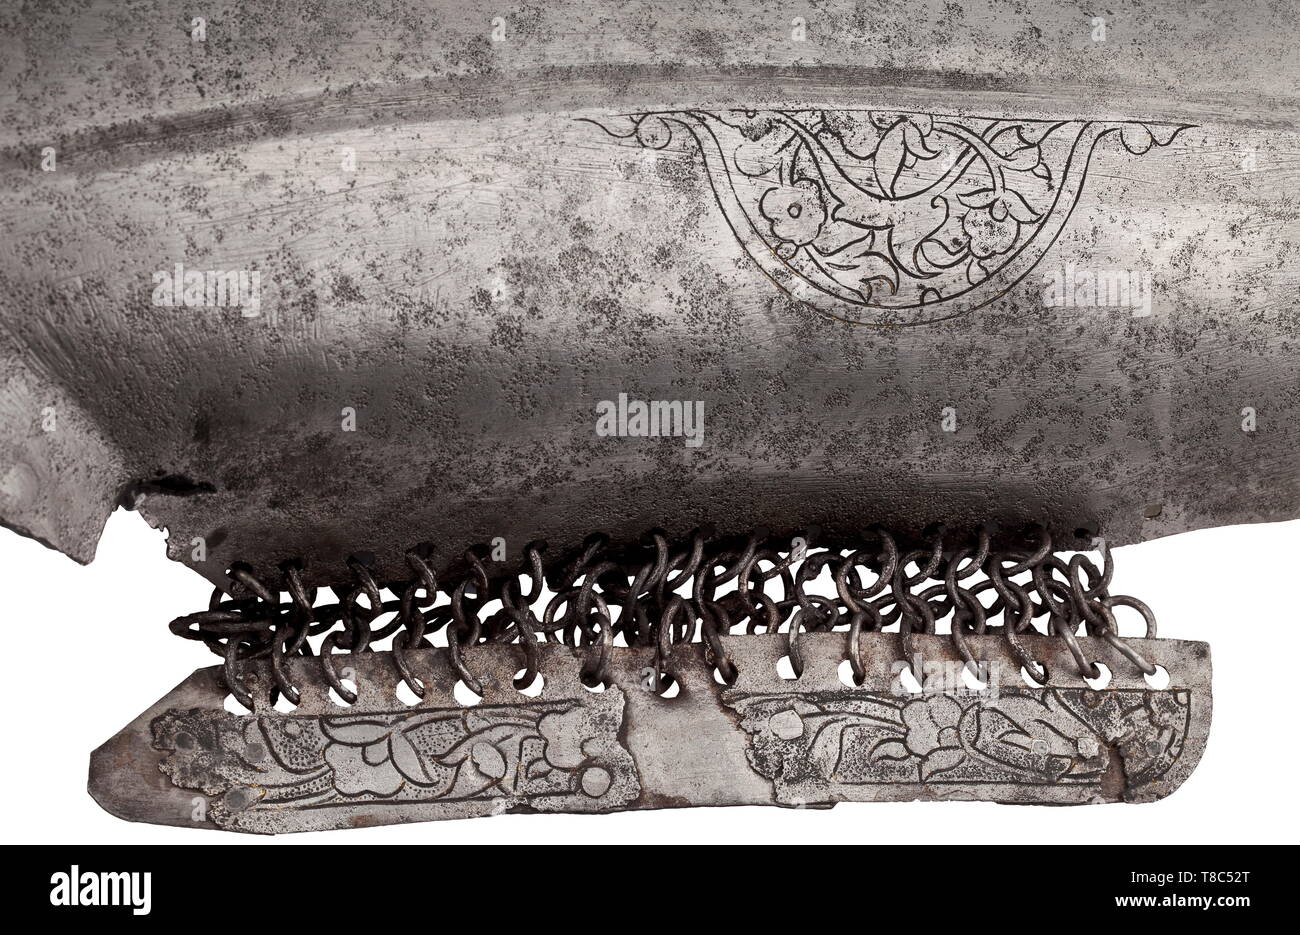 A chamfron, 1st half of the 16th century East Anatolian or Iranian, wrought iron. Grooved edge, with semi-circular chased openings for the eyes and ears. Attached side plates mounted to the centre with four rows of riveted rings. At the forehead large cartouche with engraved scrolling ferns and flowers over cut 'Tamga' of the St. Irene arsenal in Constantinople. In the centre an engraved circular cartouche with a lion passant, the sides and nasal section with floral ornaments. Cleaned condition, some older repairs, small losses, black lacquered i, Additional-Rights-Clearance-Info-Not-Available Stock Photo